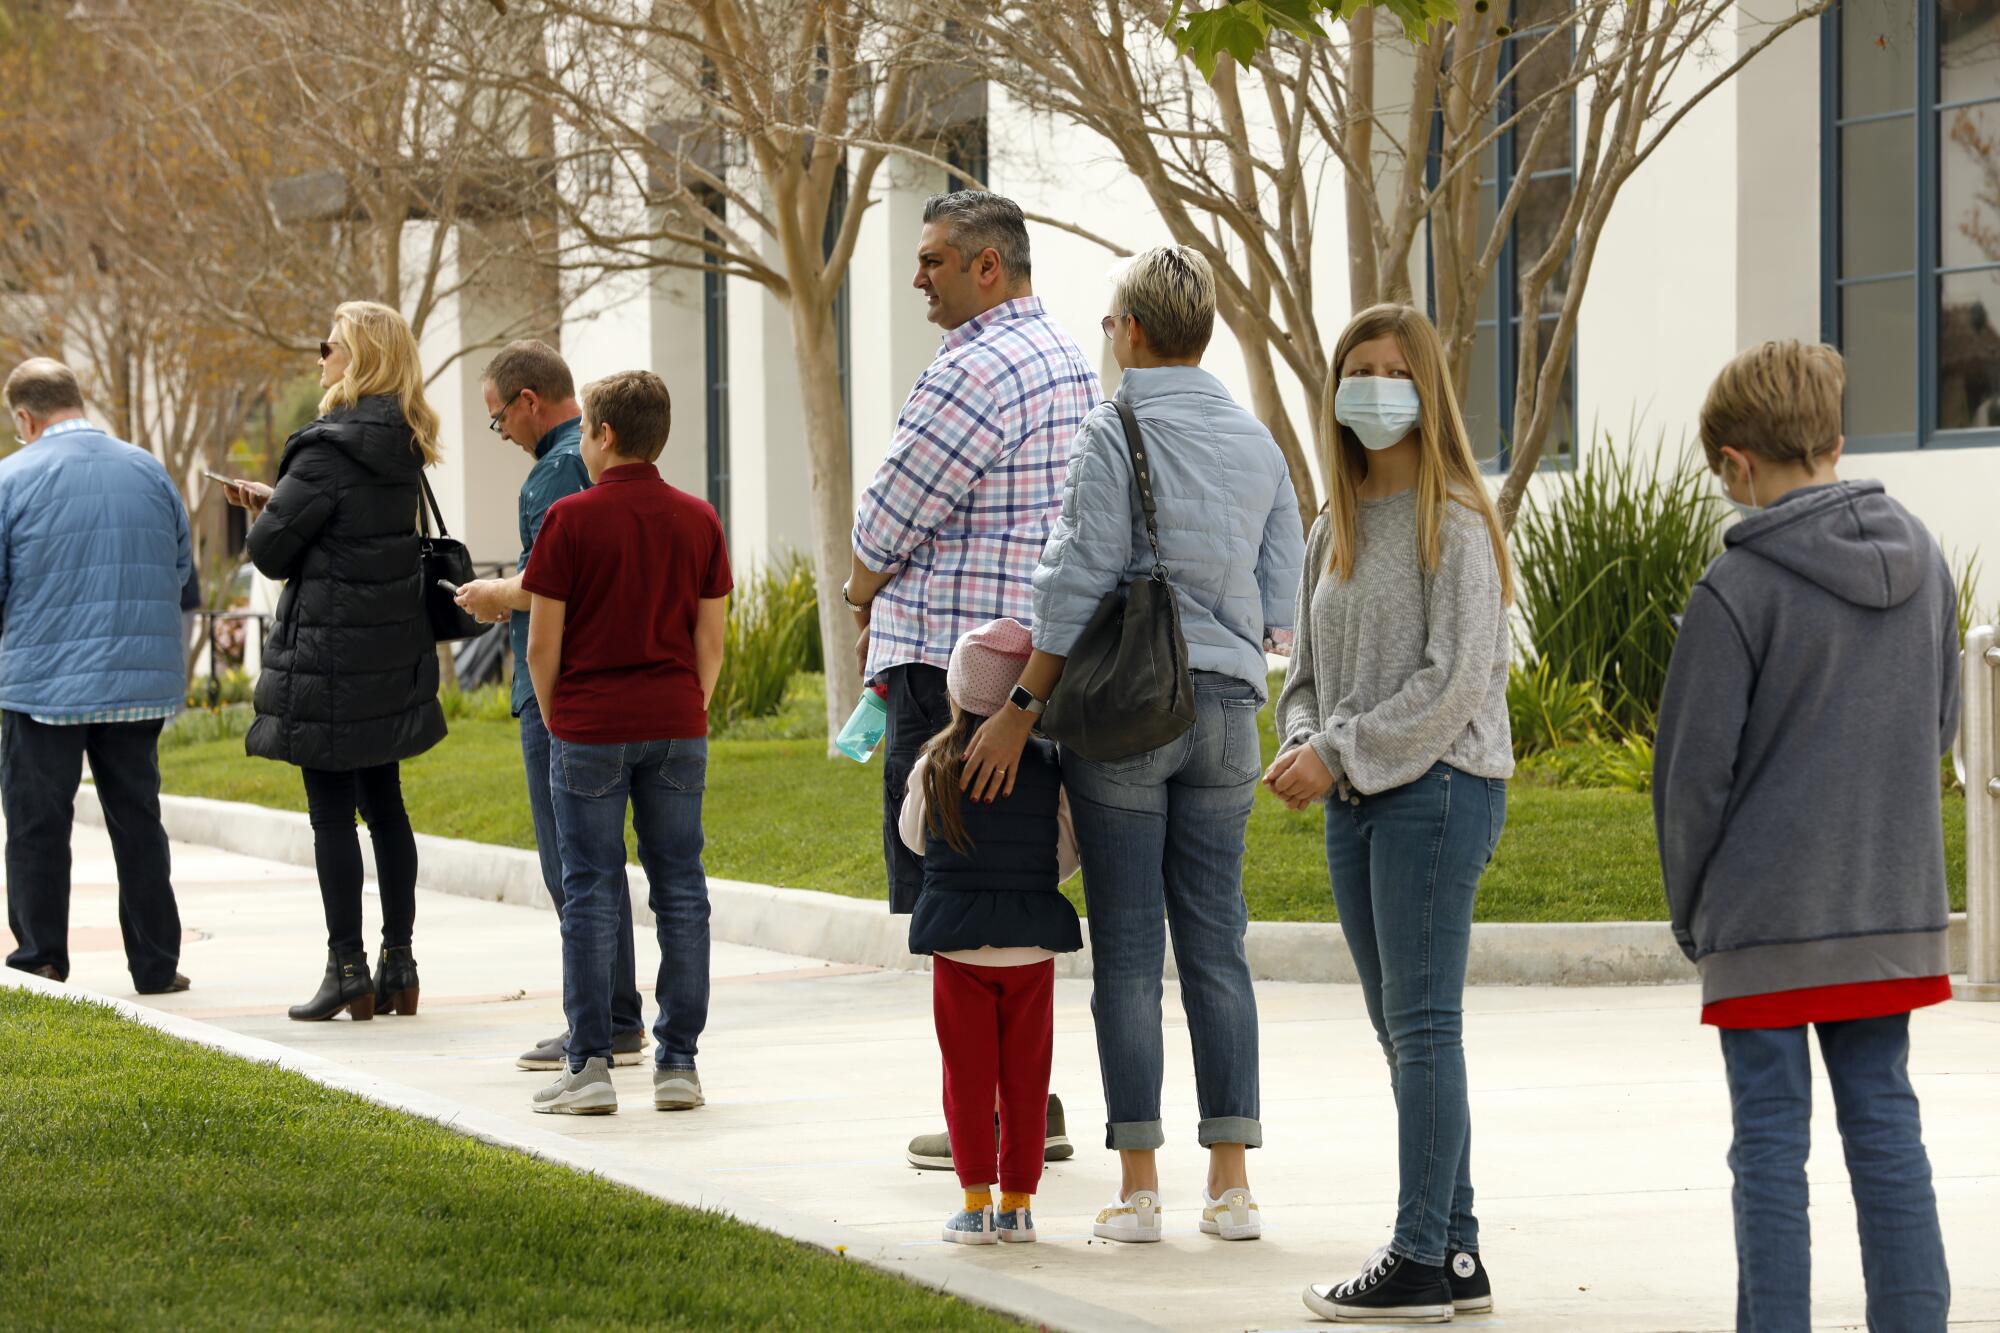 Practicing social distancing and wearing masks and gloves, people wait in line to take Communion at Godspeak Calvary Chapel in Thousand Oaks.